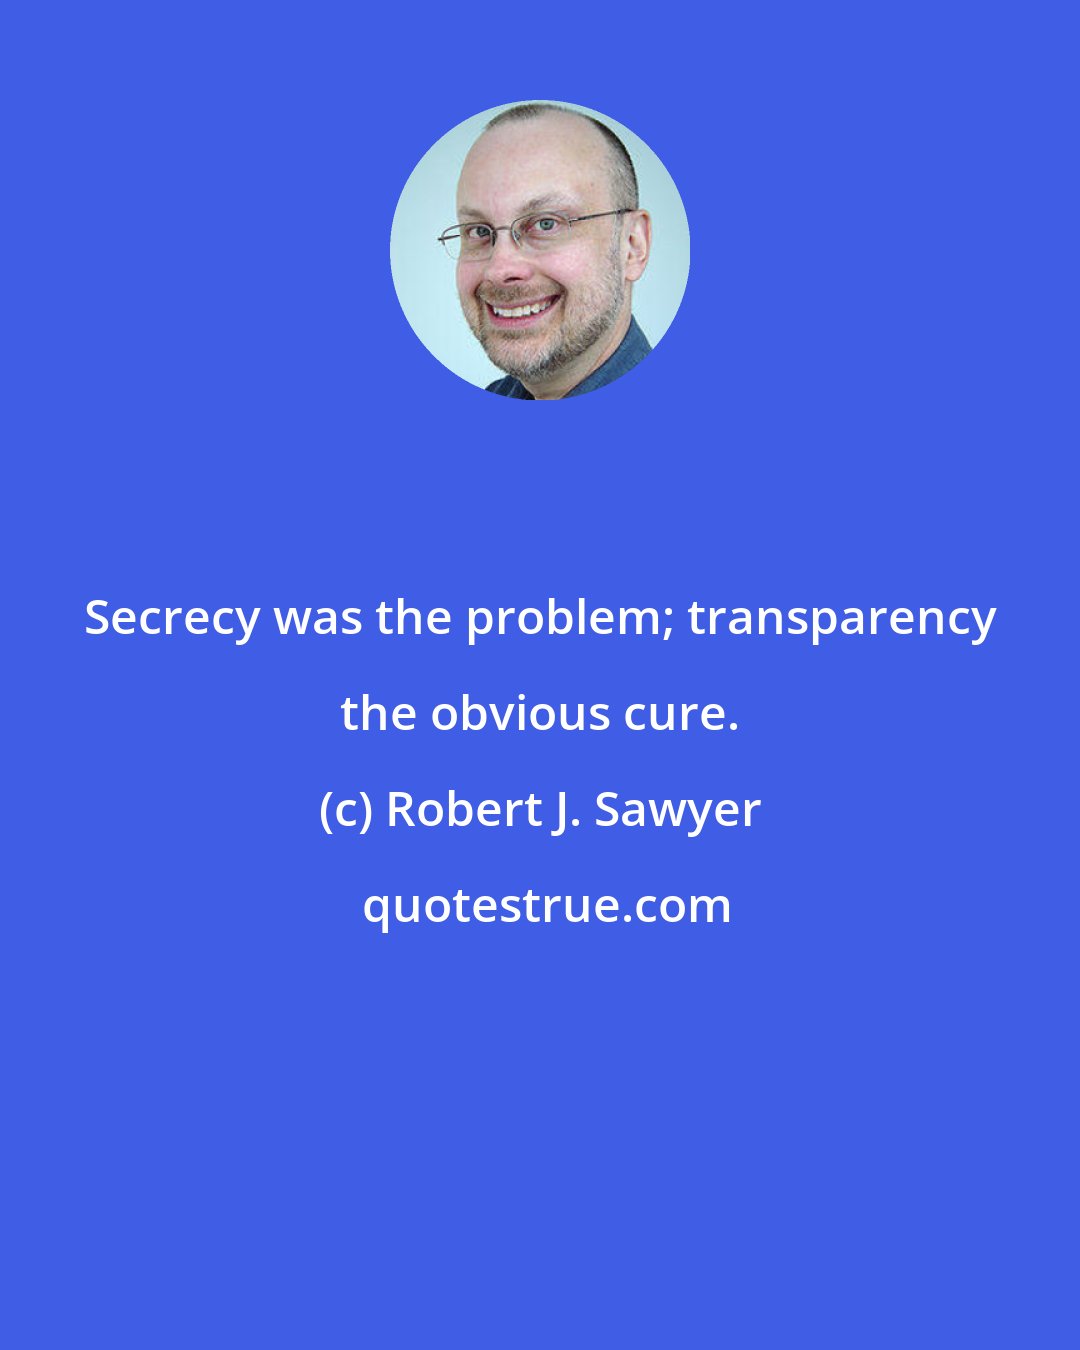 Robert J. Sawyer: Secrecy was the problem; transparency the obvious cure.